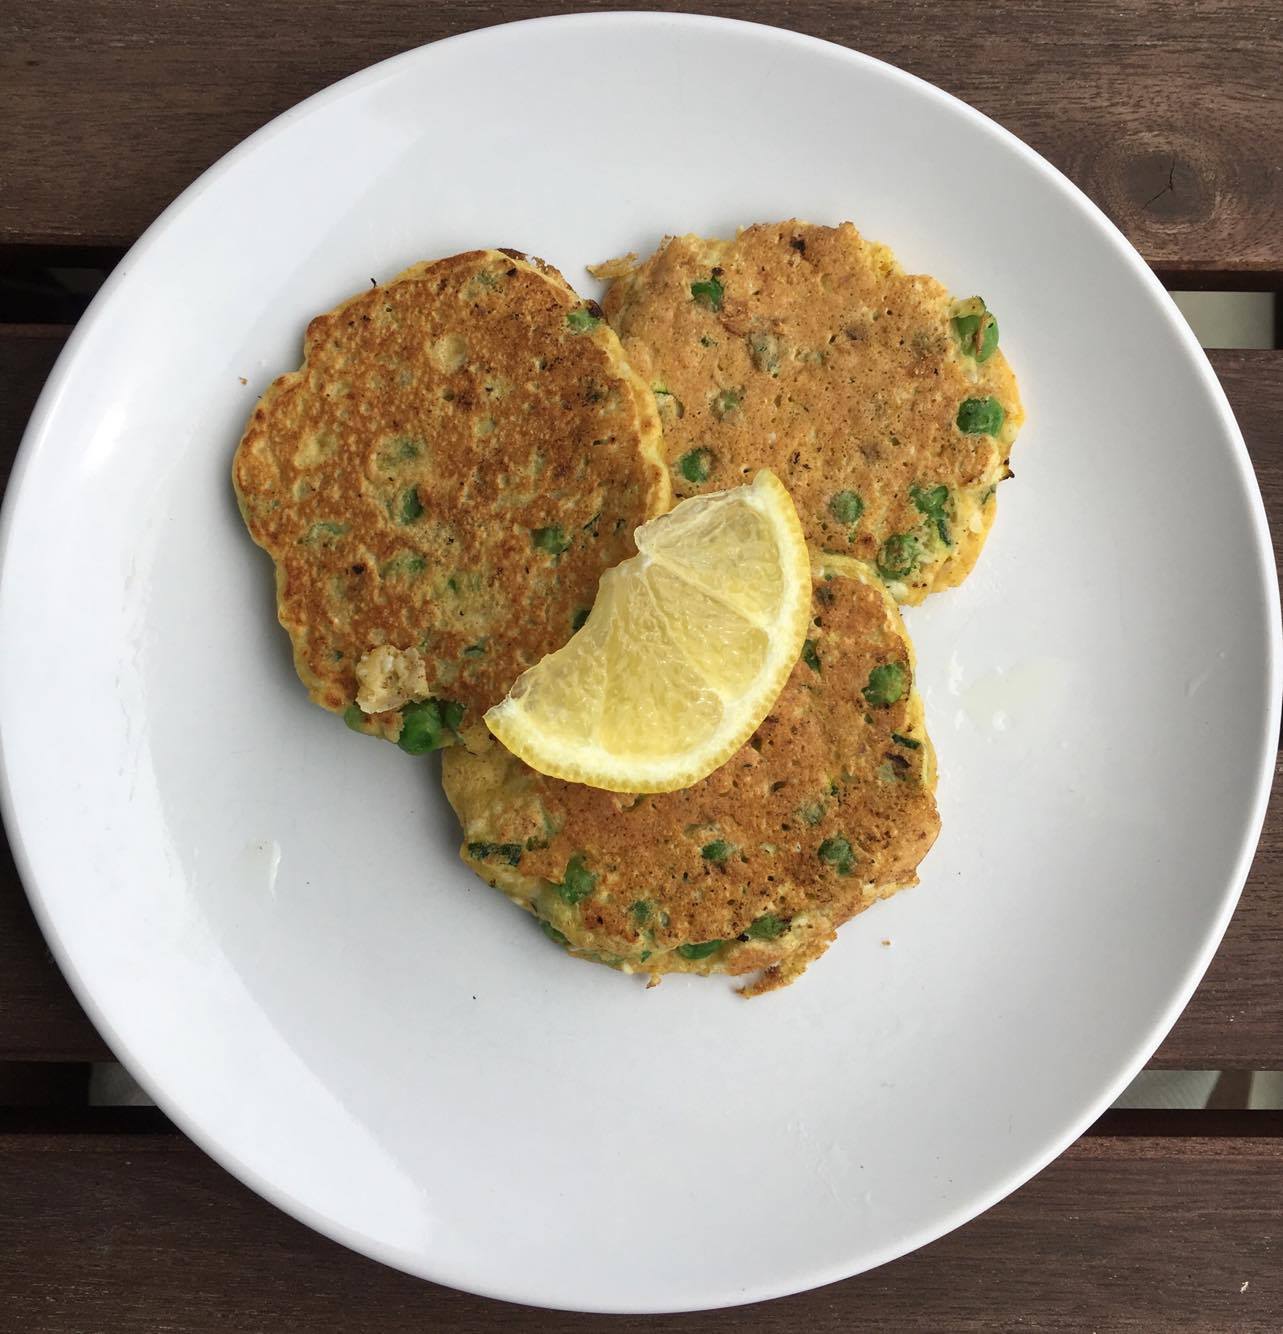 Zucchini (courgette), Pea & Sesame Seed Fritters